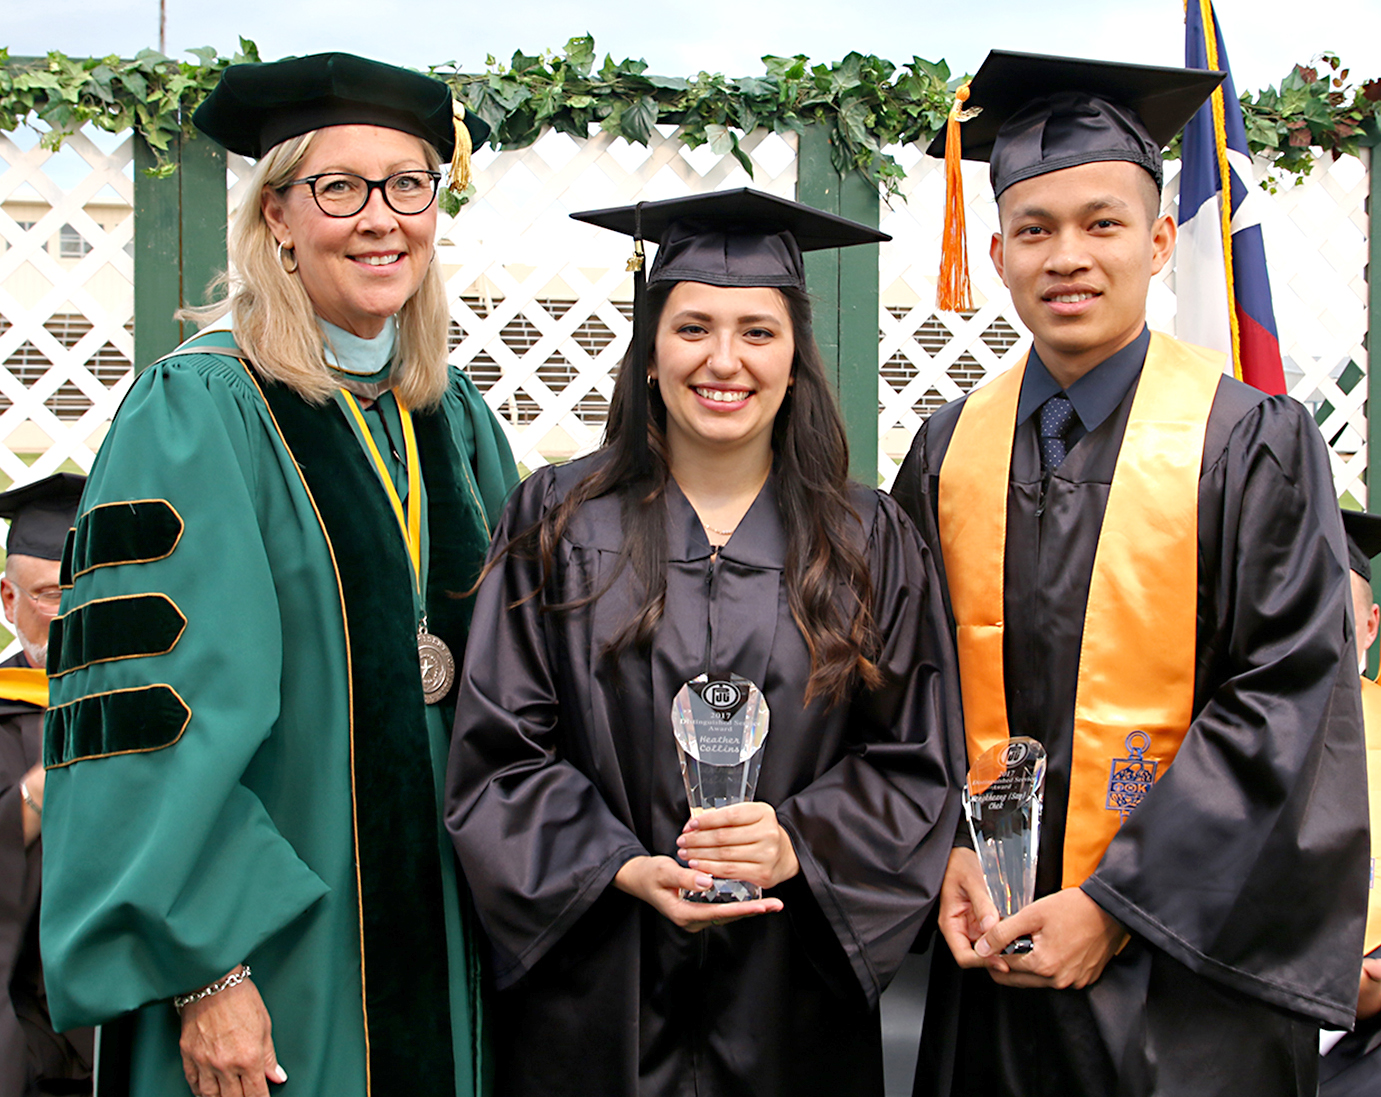 More Than 500 Students Graduate from PJC